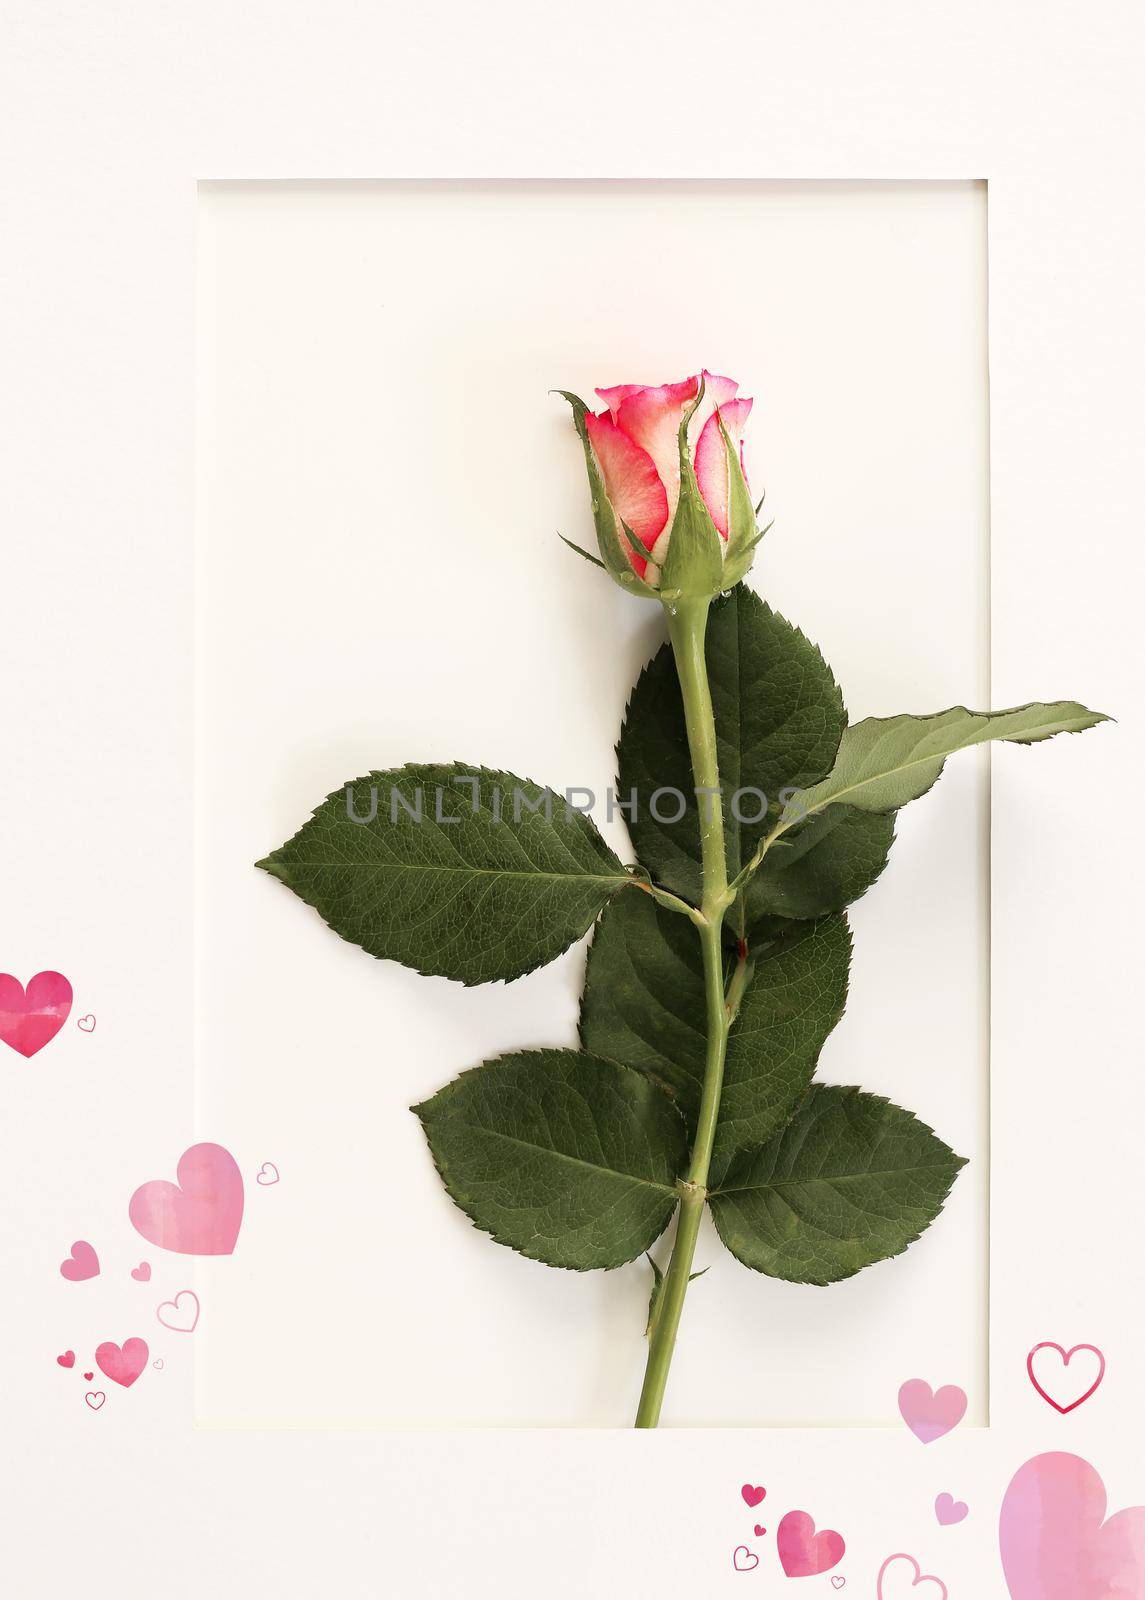 Love card with rose, Birthday, mothers day, Valentines day, Mothers day greeting card. Red pink rose flower on white frame. Top view, copy space, place for text. Cards for romantic love greetings